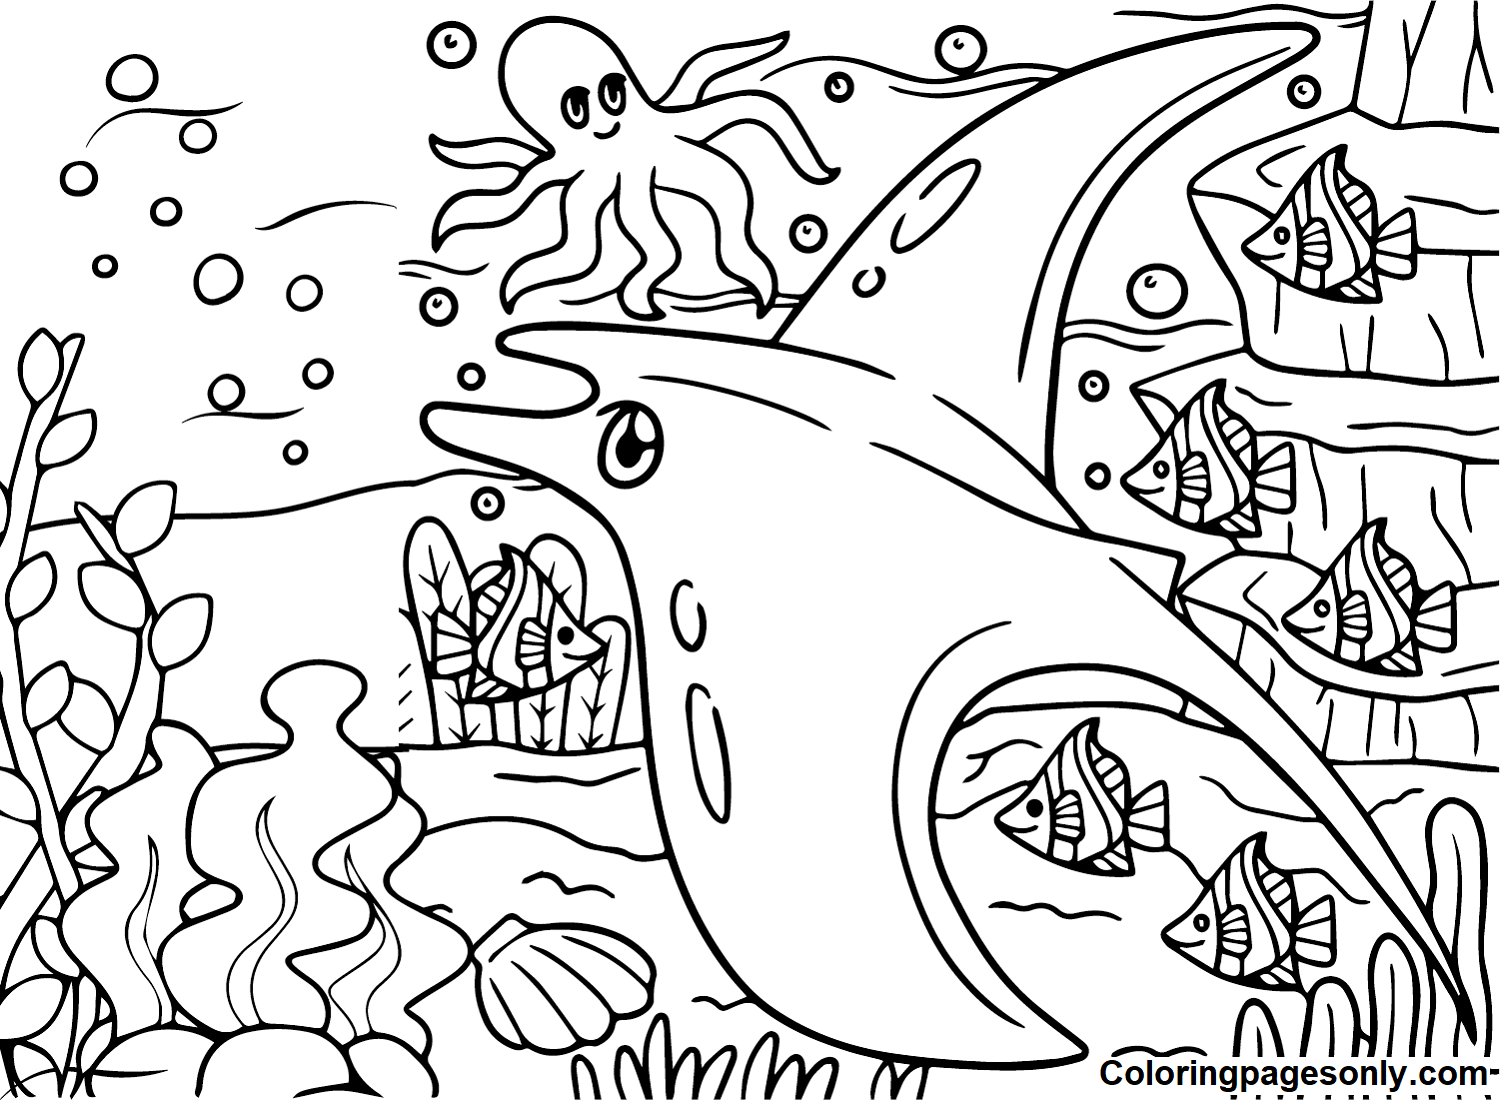 Stingray and Octopus Coloring Page